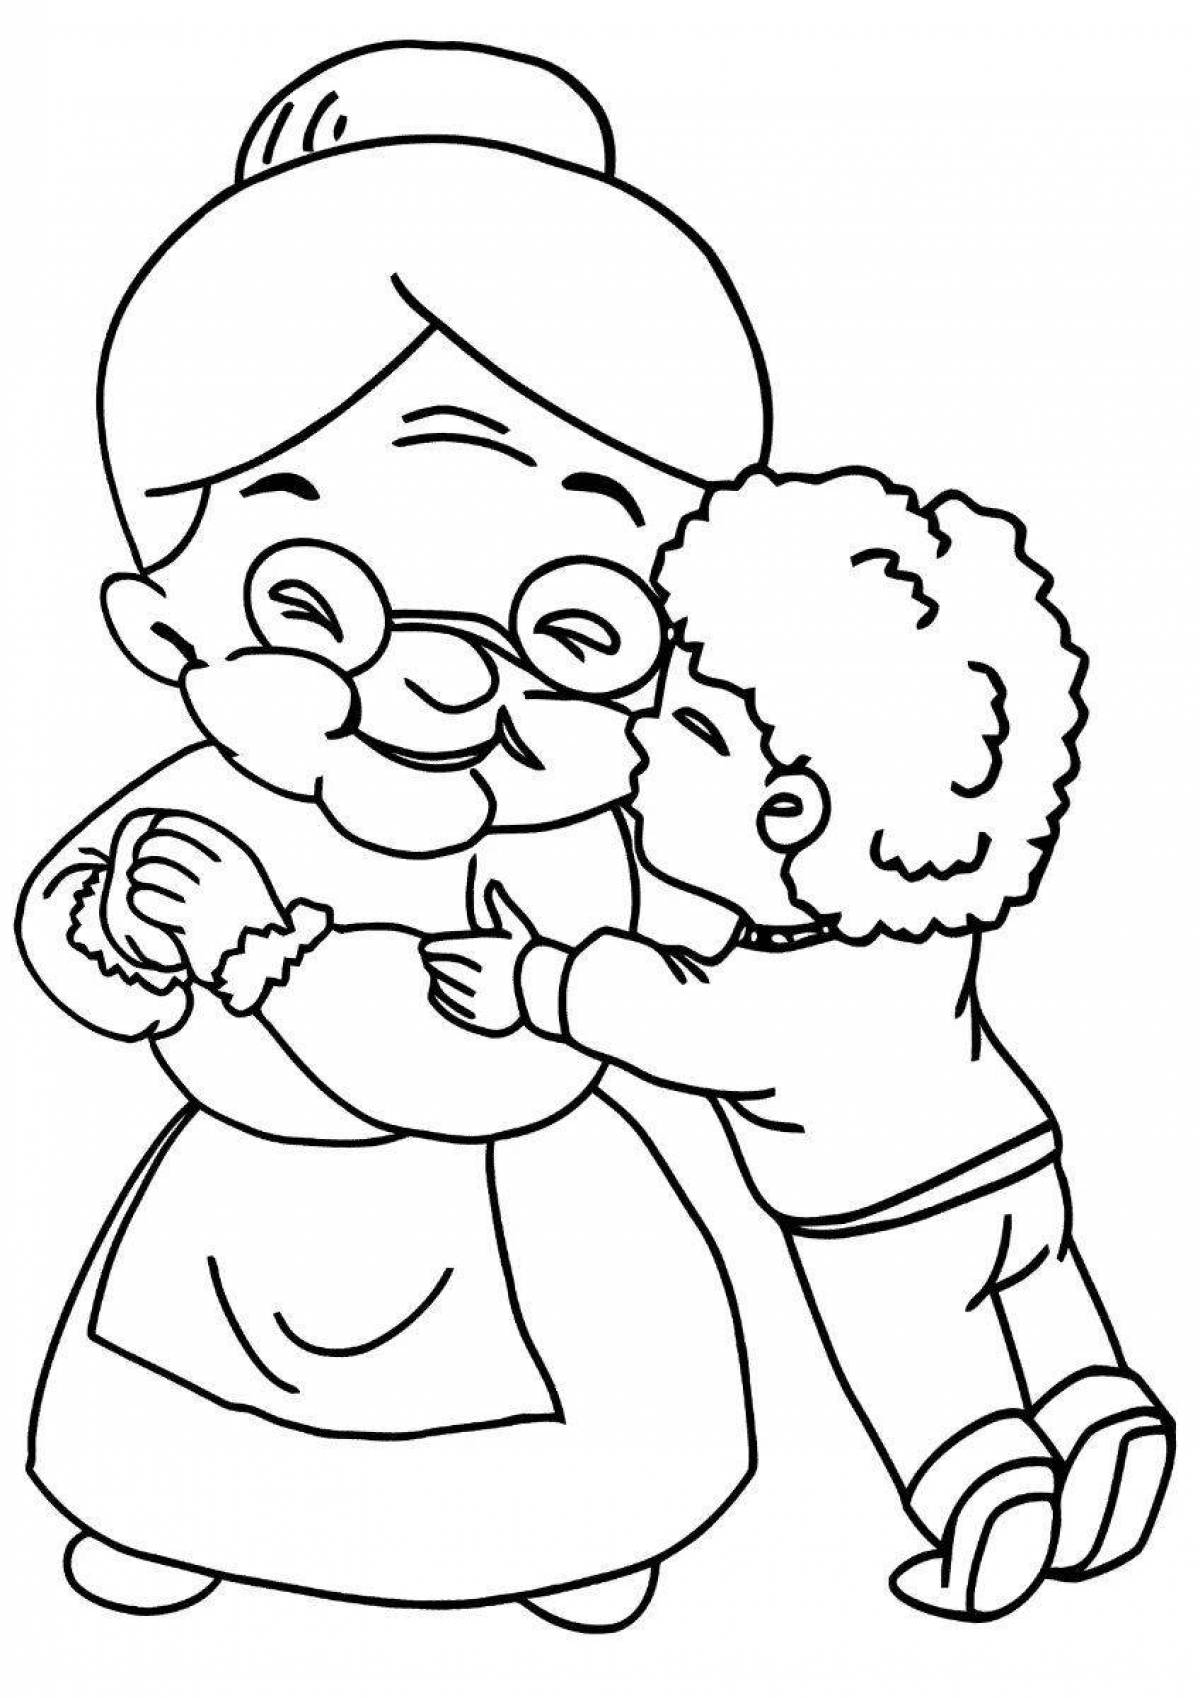 Glorious hug day coloring pages for kids